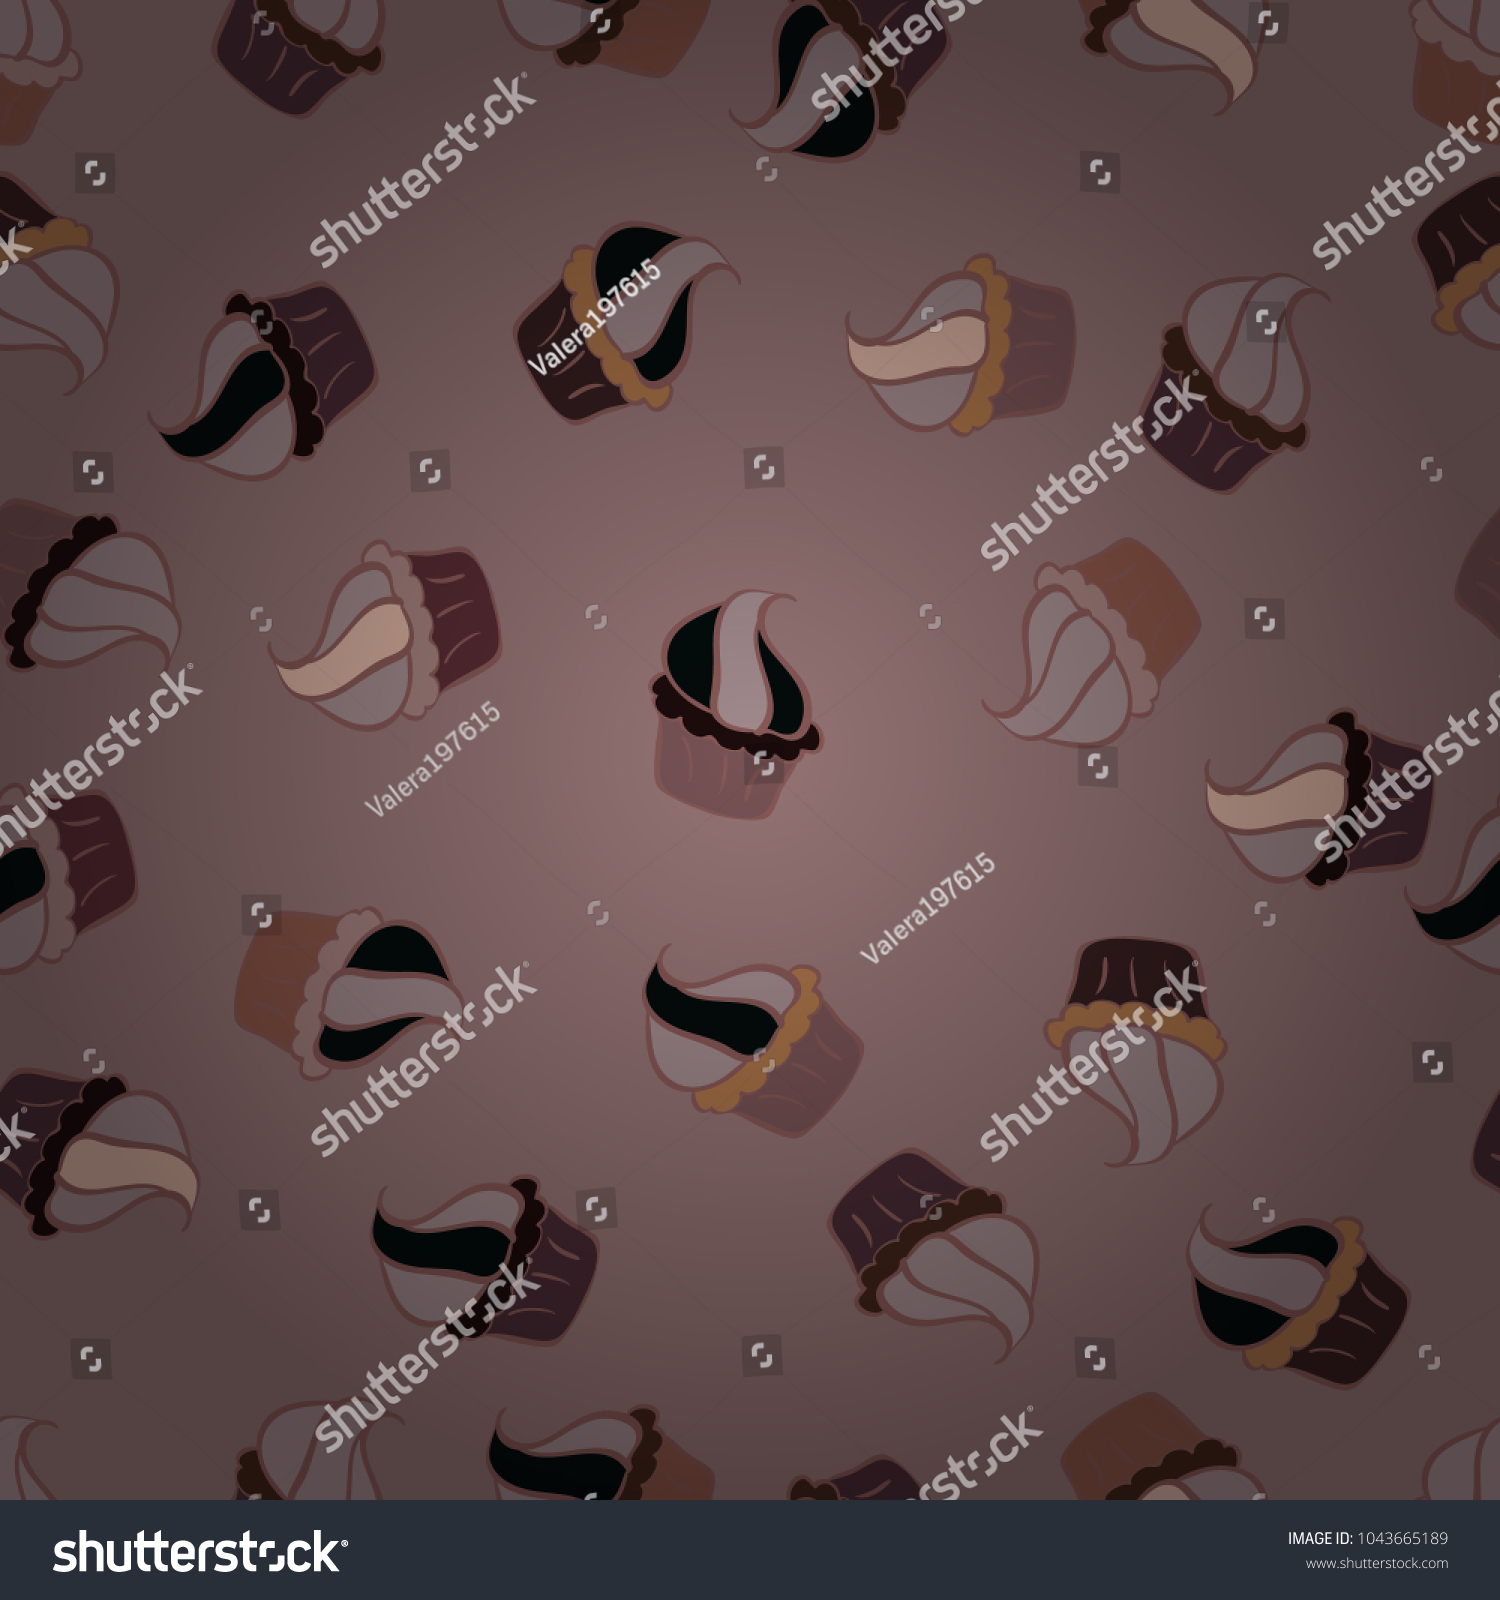 On pink, gray and brown. Cakes seamless pattern collection. Of different types of beautiful modern cakes, such as chocolate cake. Vector illustration. #1043665189